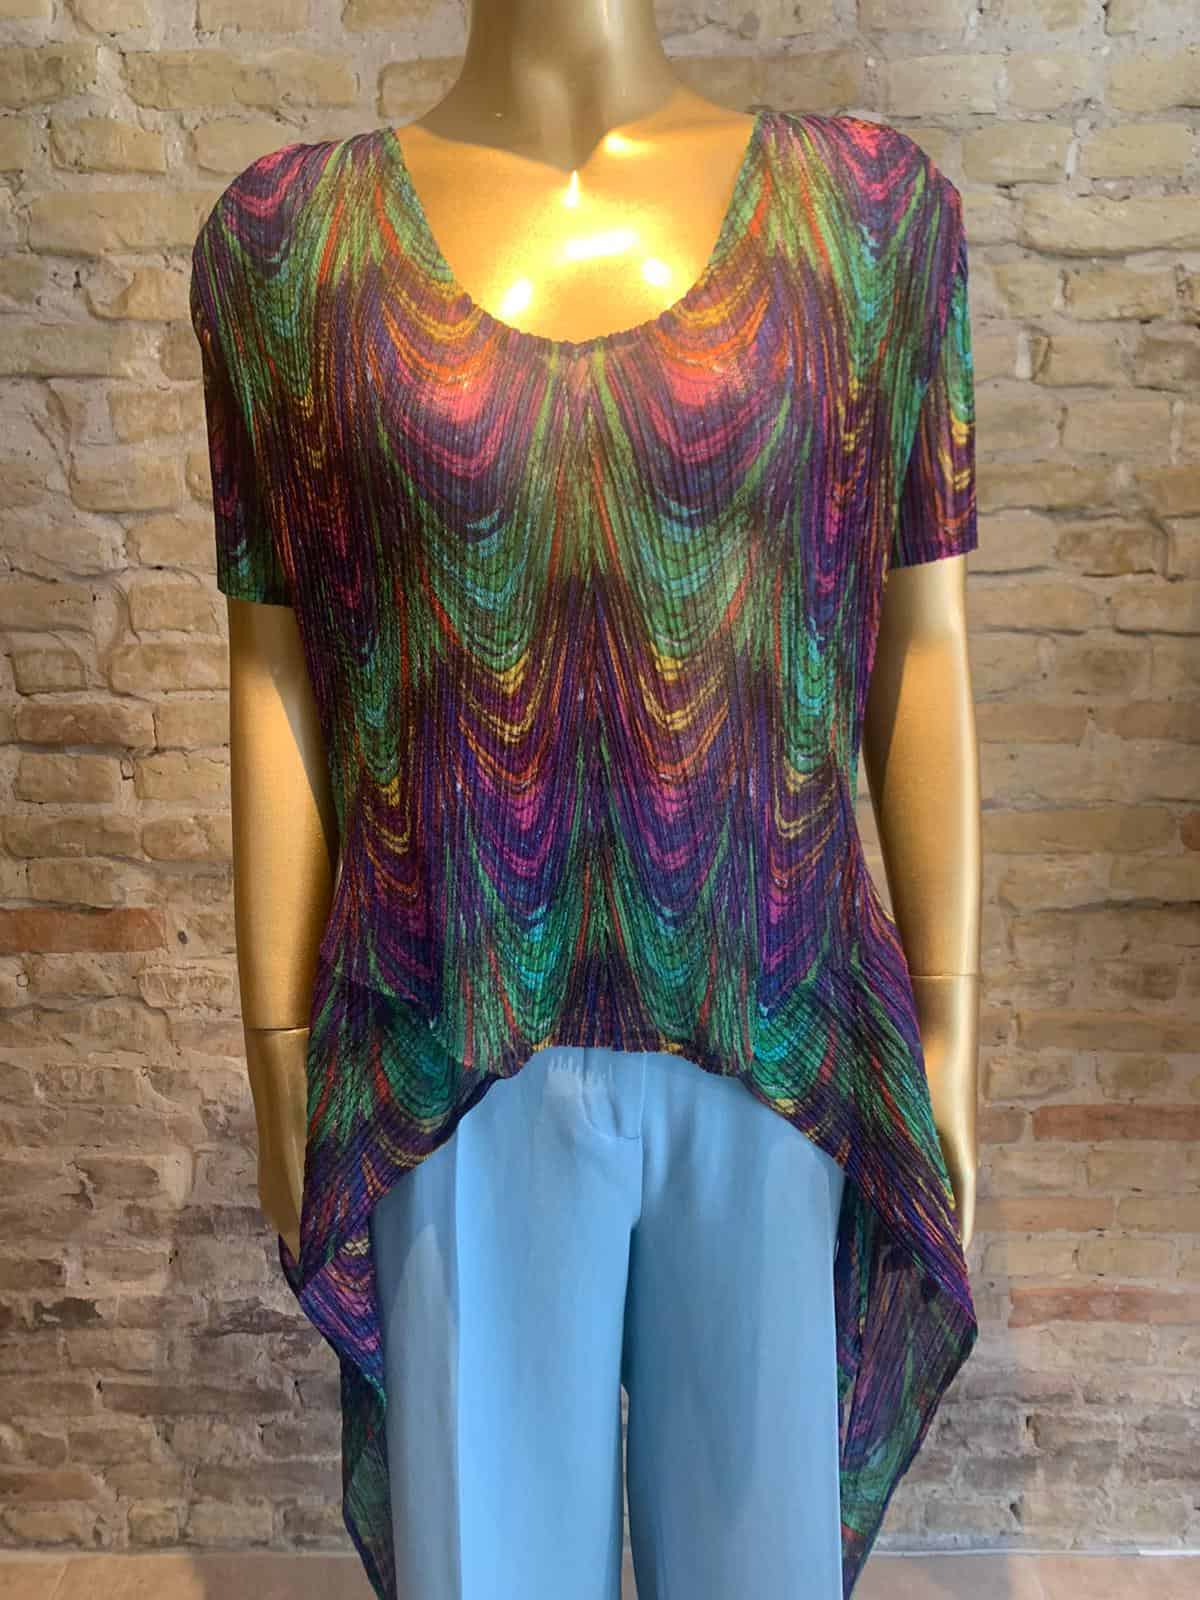 Issey Miyake T-shirt in color mix